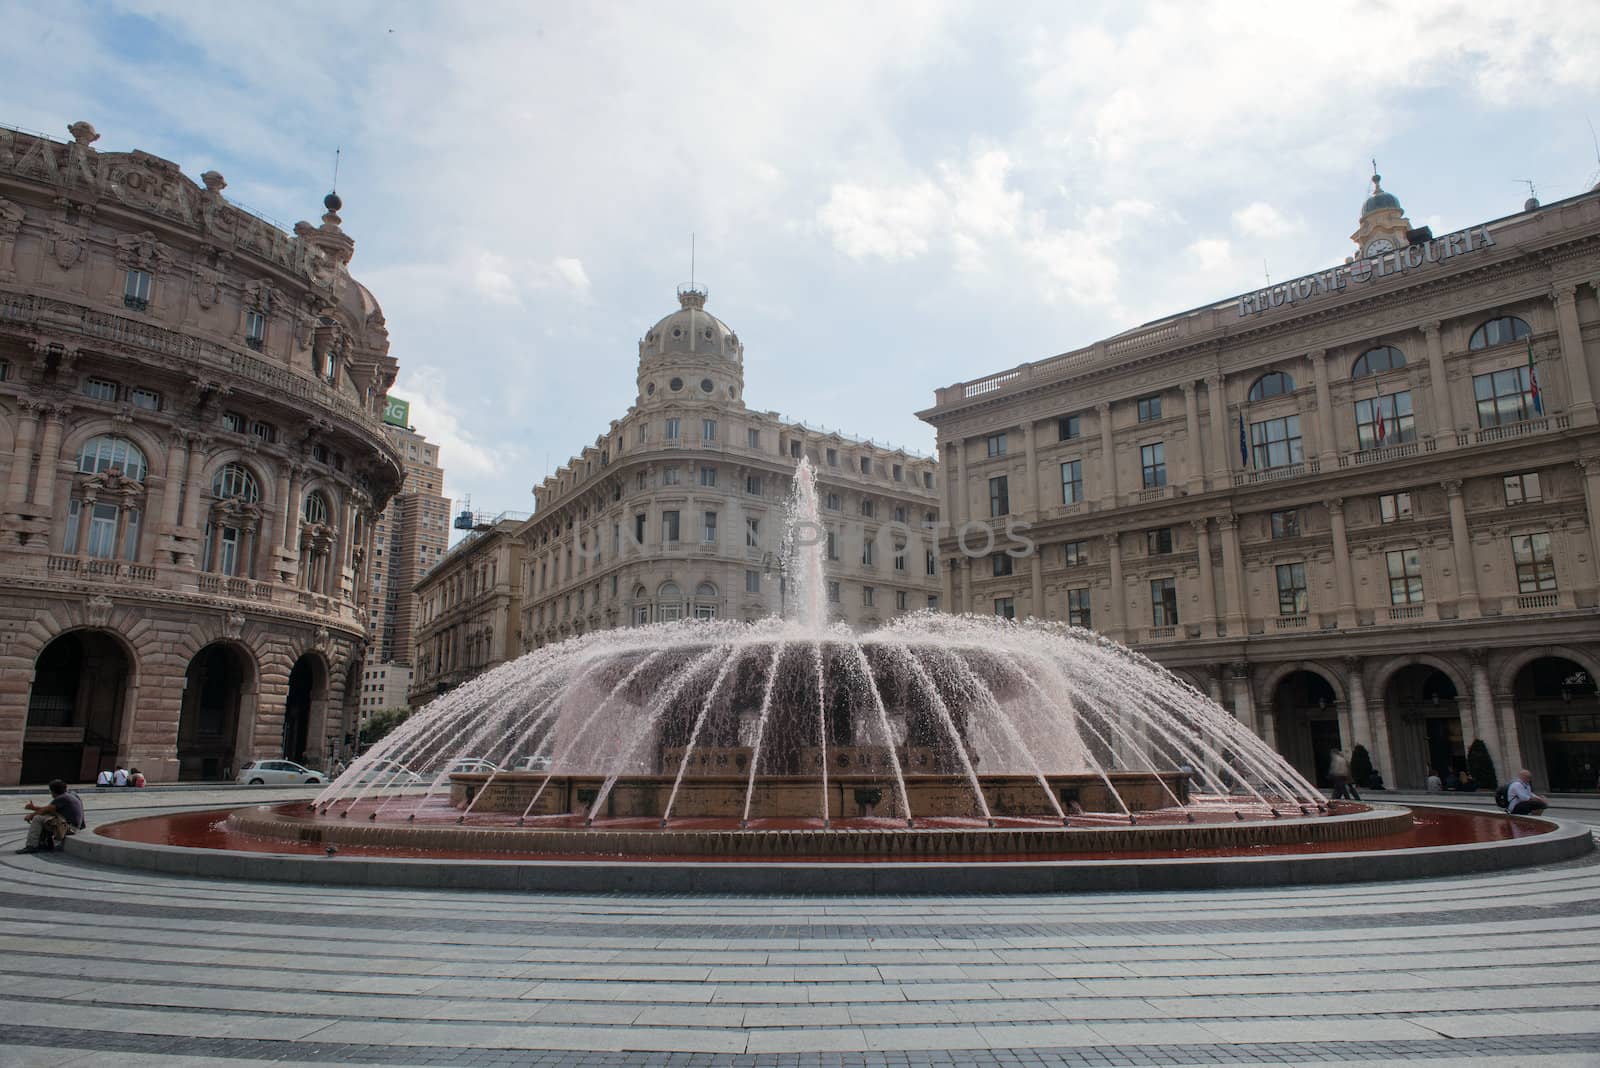 The water of the fountain in Piazza De Ferrari was colored red